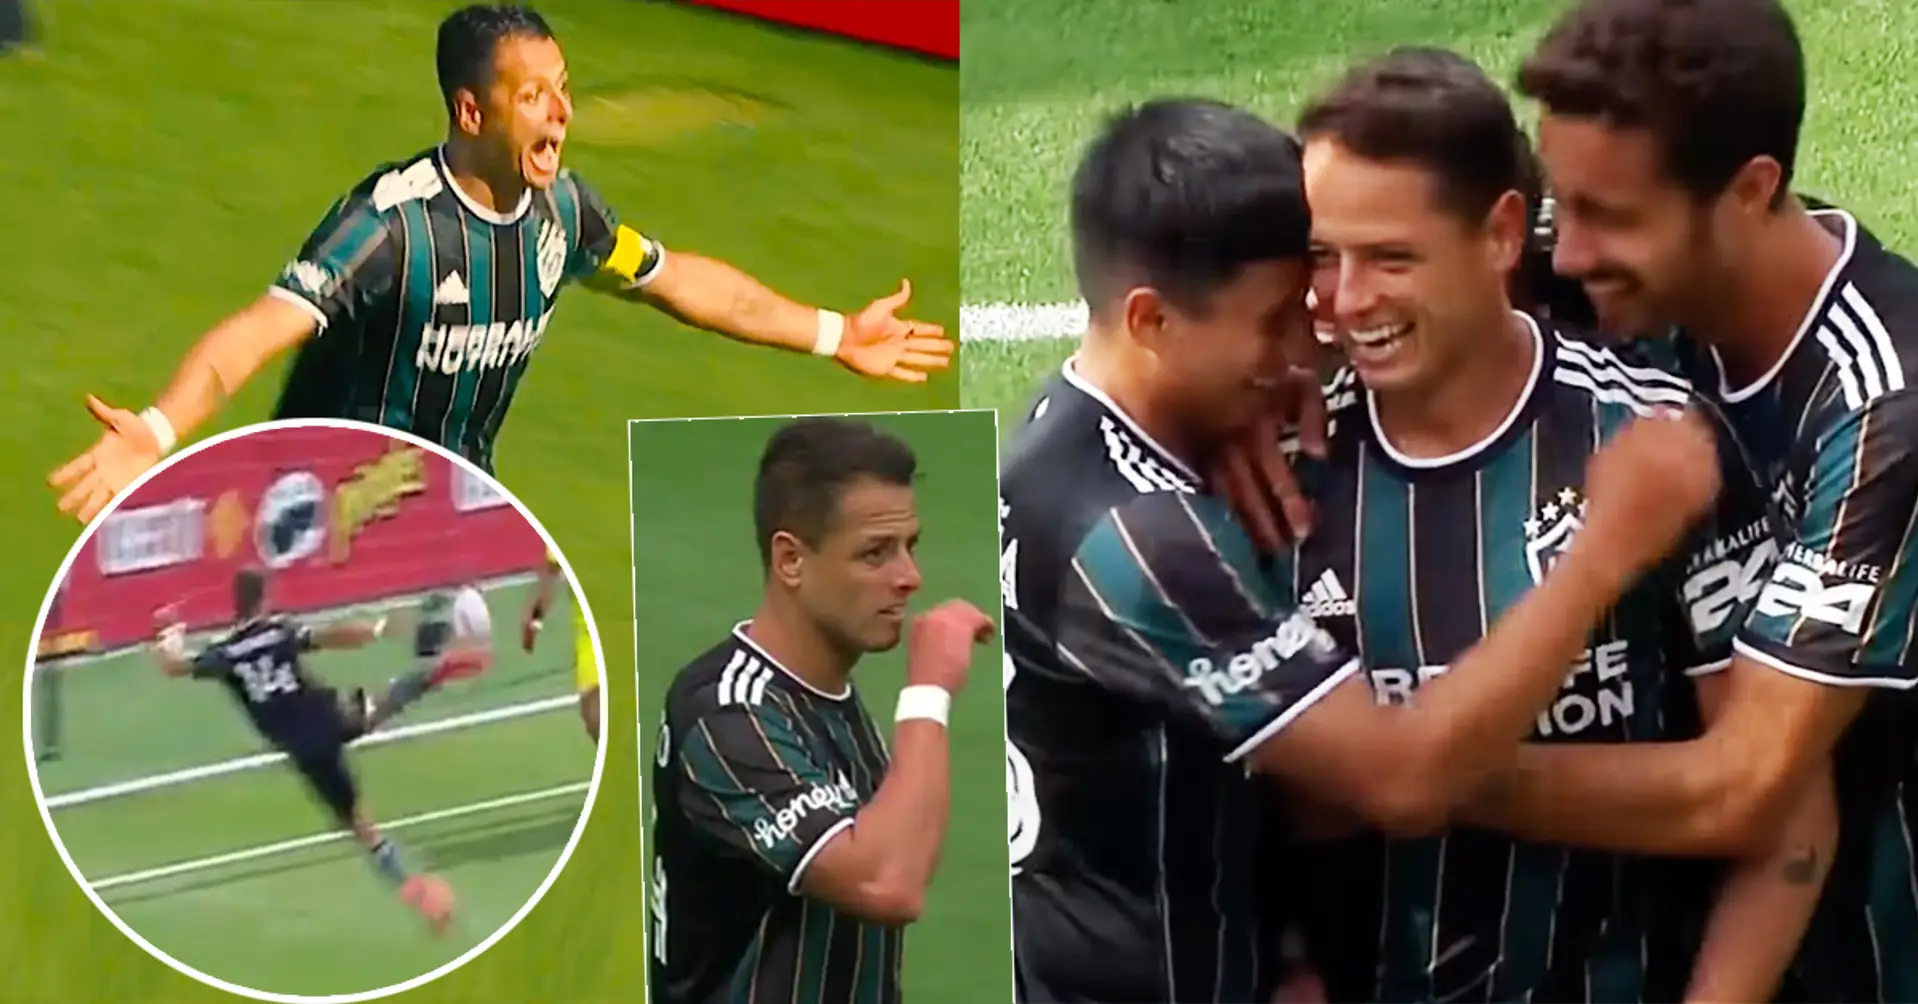 Javier 'Chicharito' Hernandez puts on a show, scores 3 amazing goals in 50 minutes